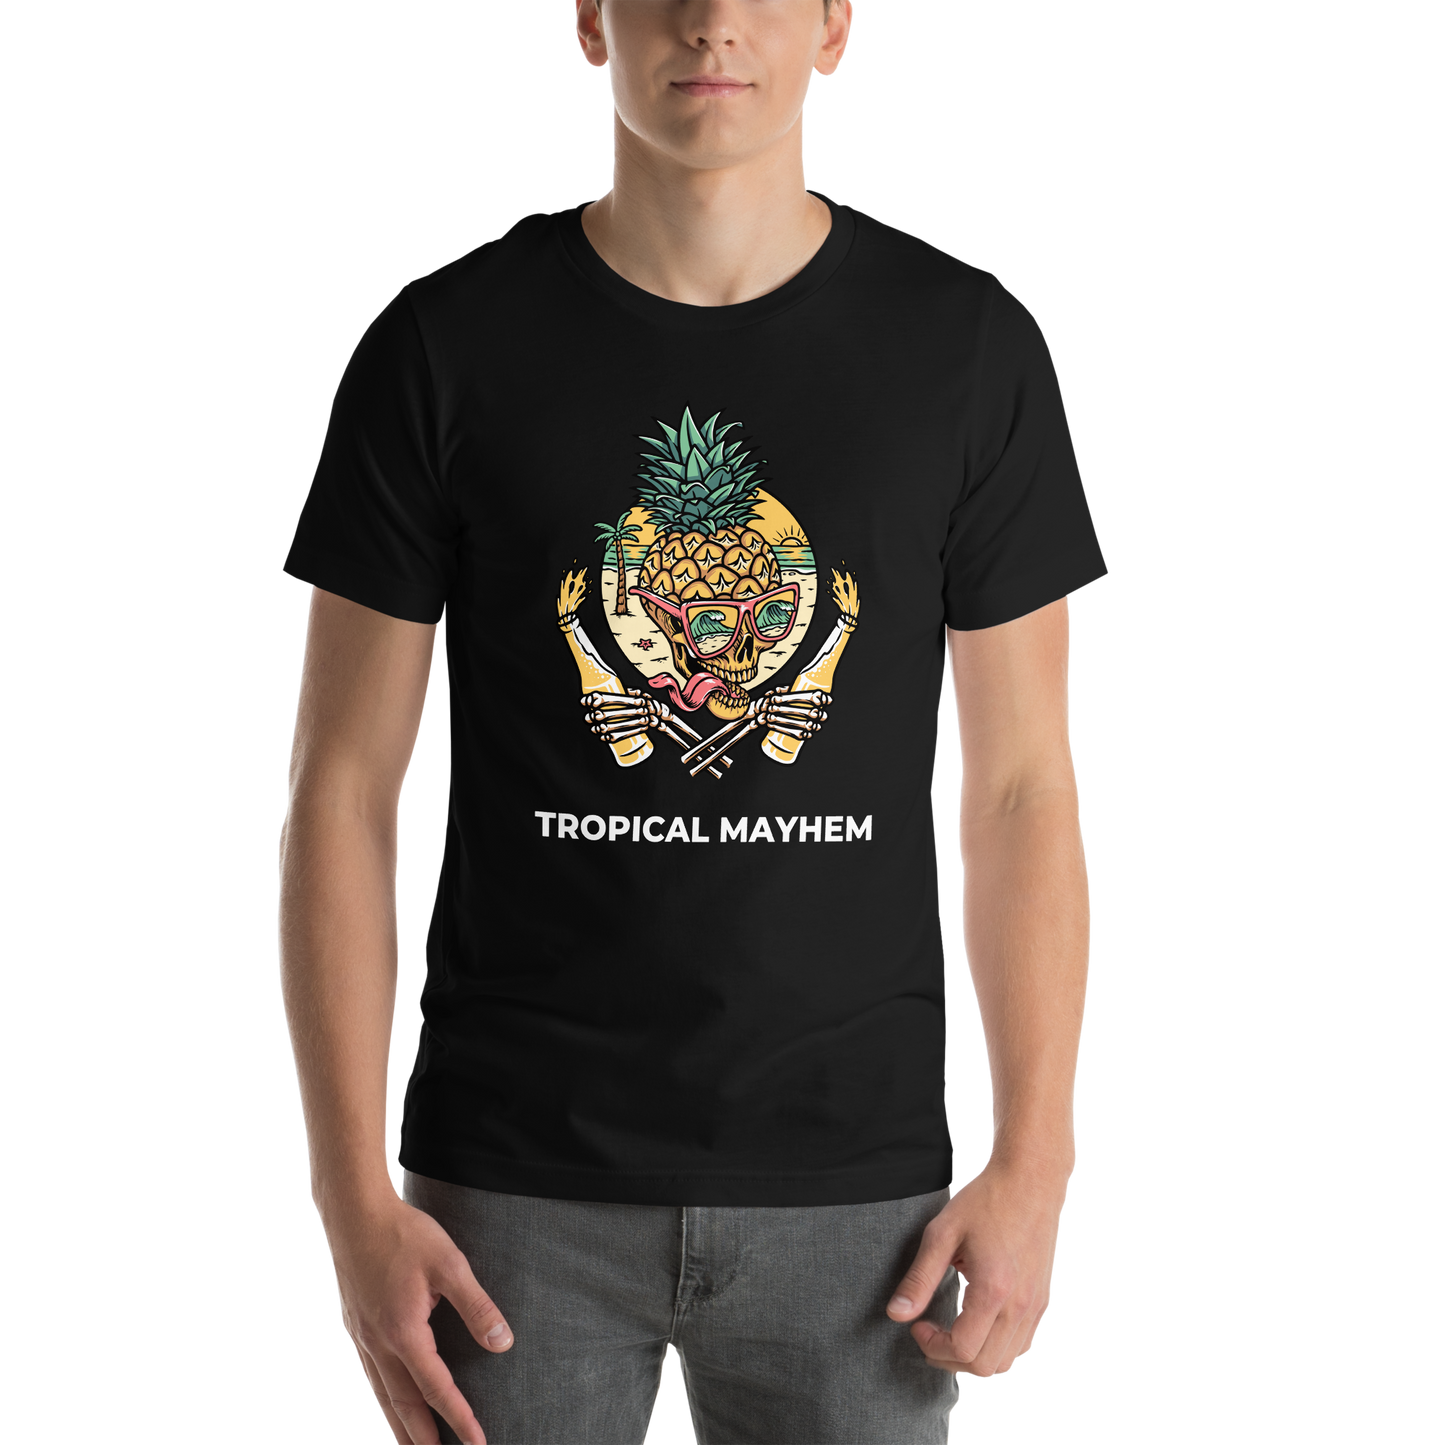 Man wearing a Black Premium Tropical Mayhem Tee featuring a Crazy Pineapple Skull graphic on the chest - Funny Graphic Pineapple Tees - Boozy Fox